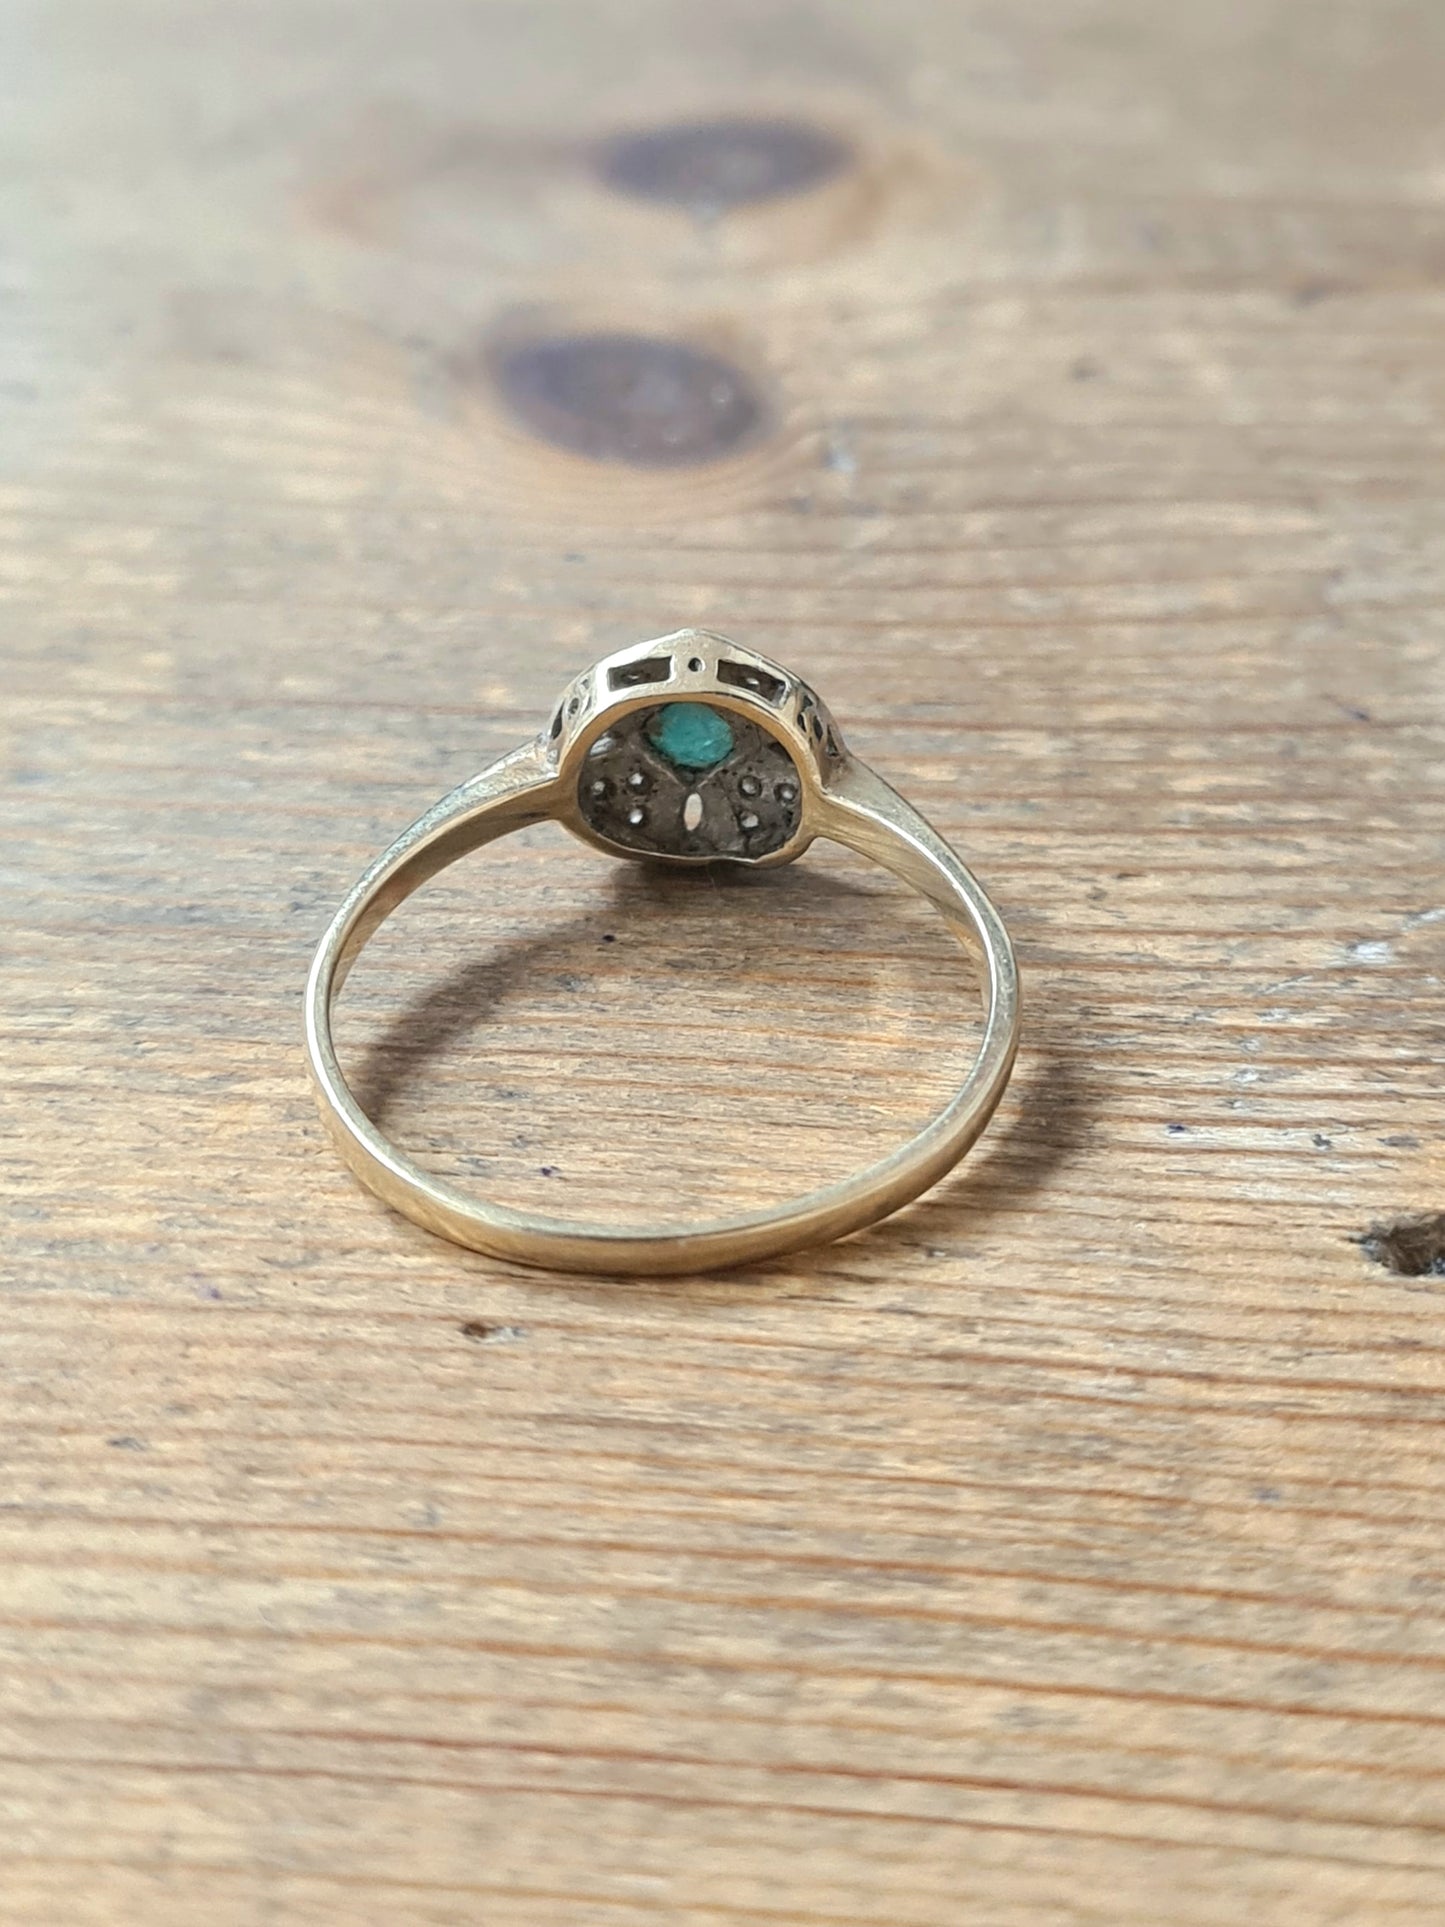 Vintage Diamonds and Green Stone 9ct Gold Hallmarked Ring